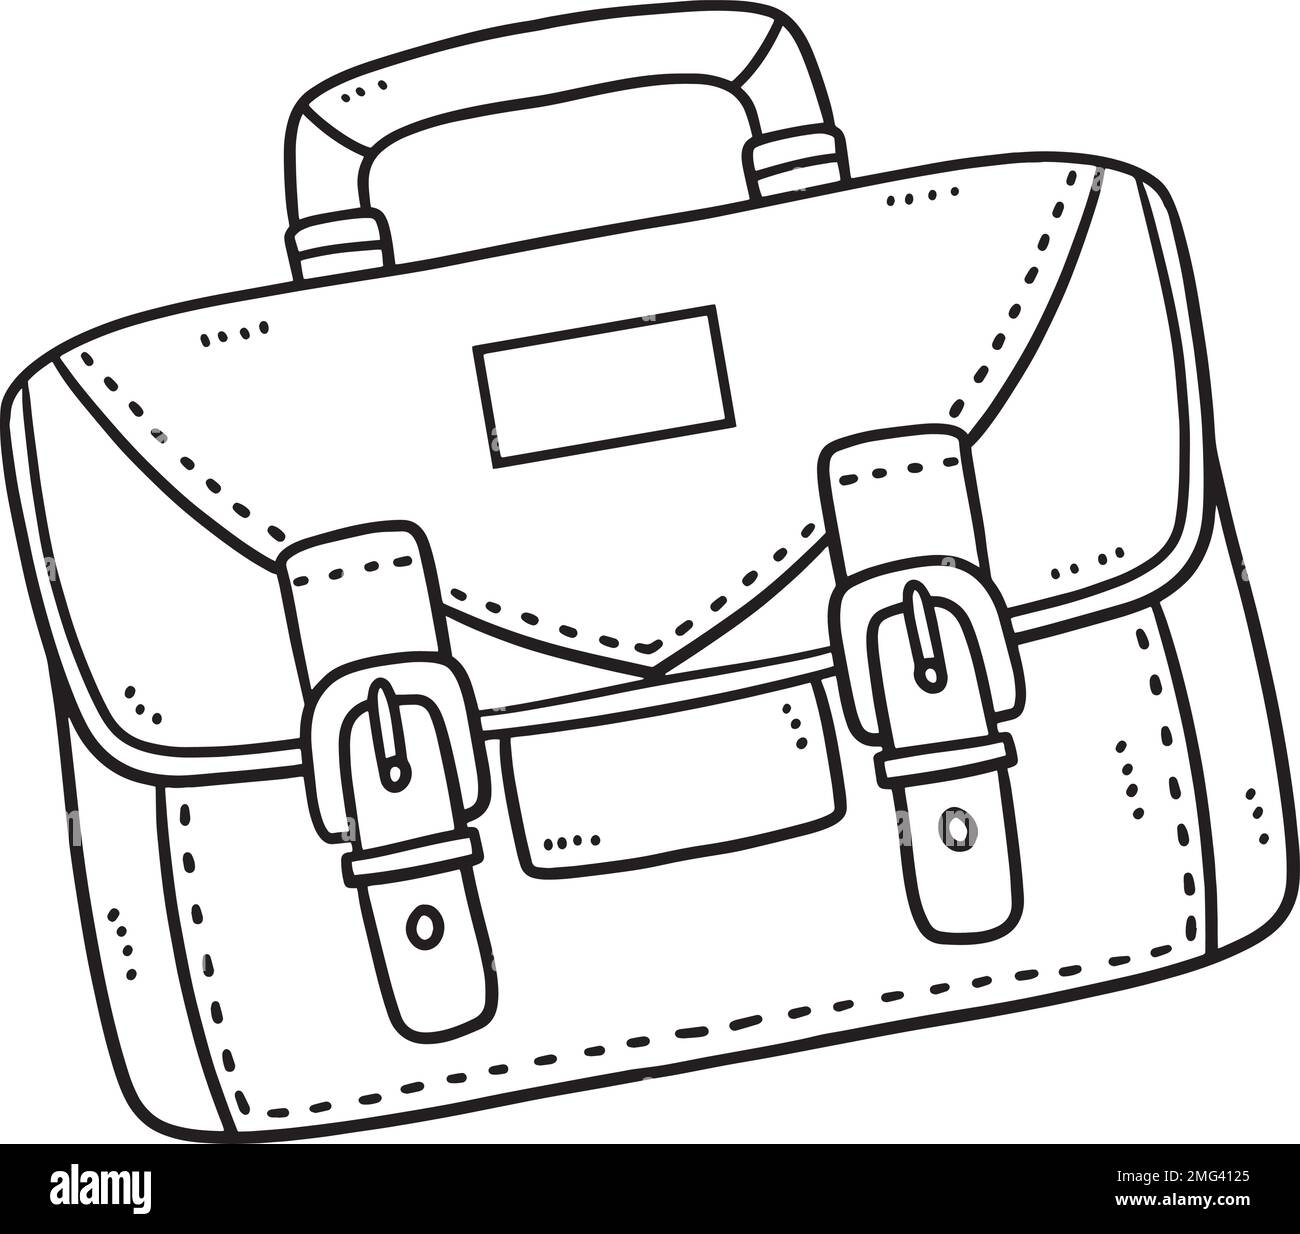 Briefcase Isolated Coloring Page for Kids Stock Vector Image & Art - Alamy